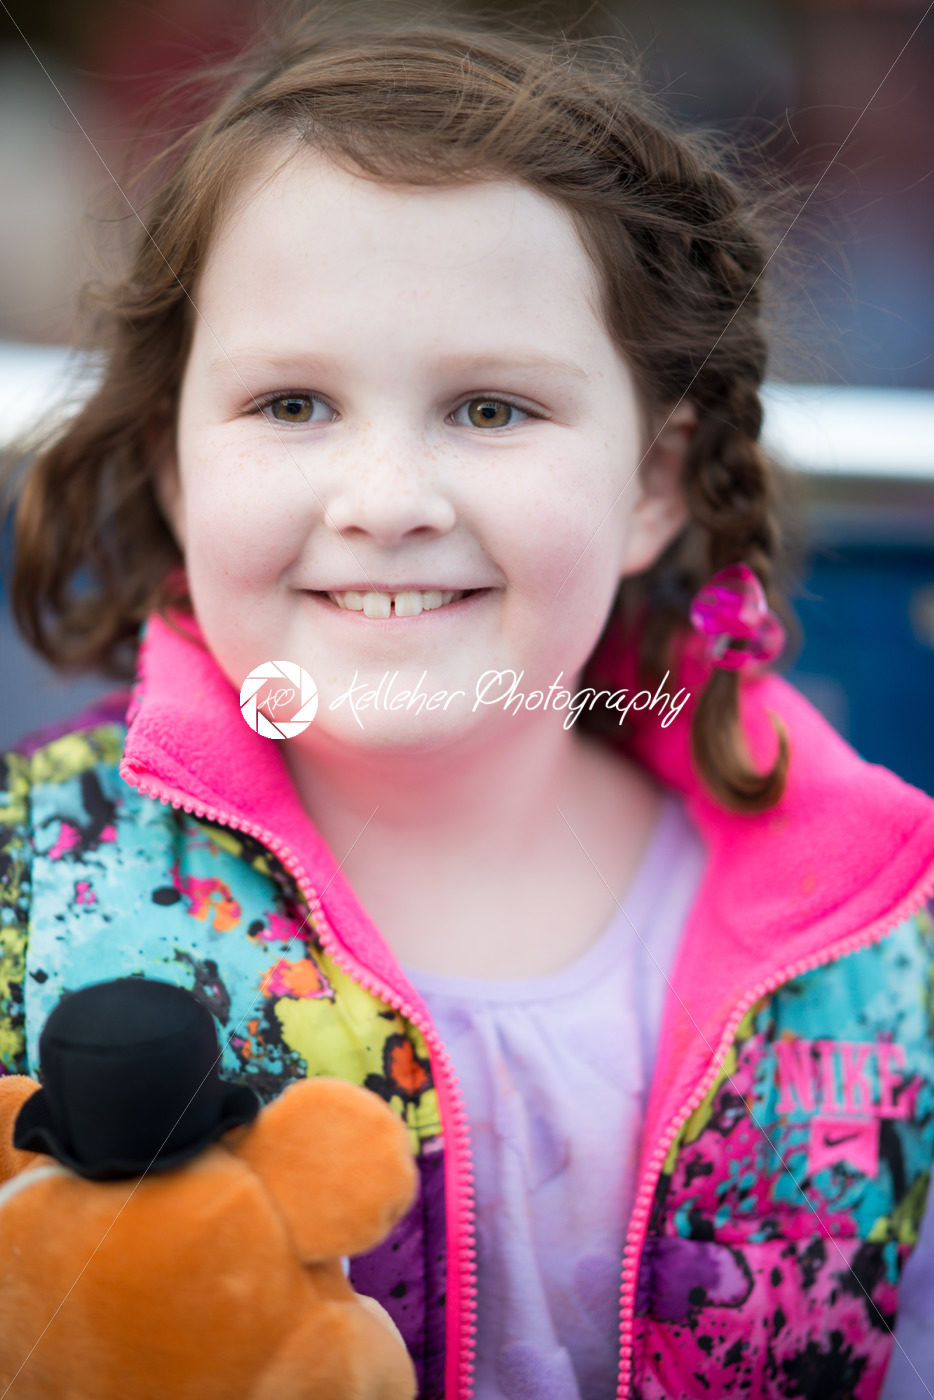 Young girl outside on boat looking happy - Kelleher Photography Store